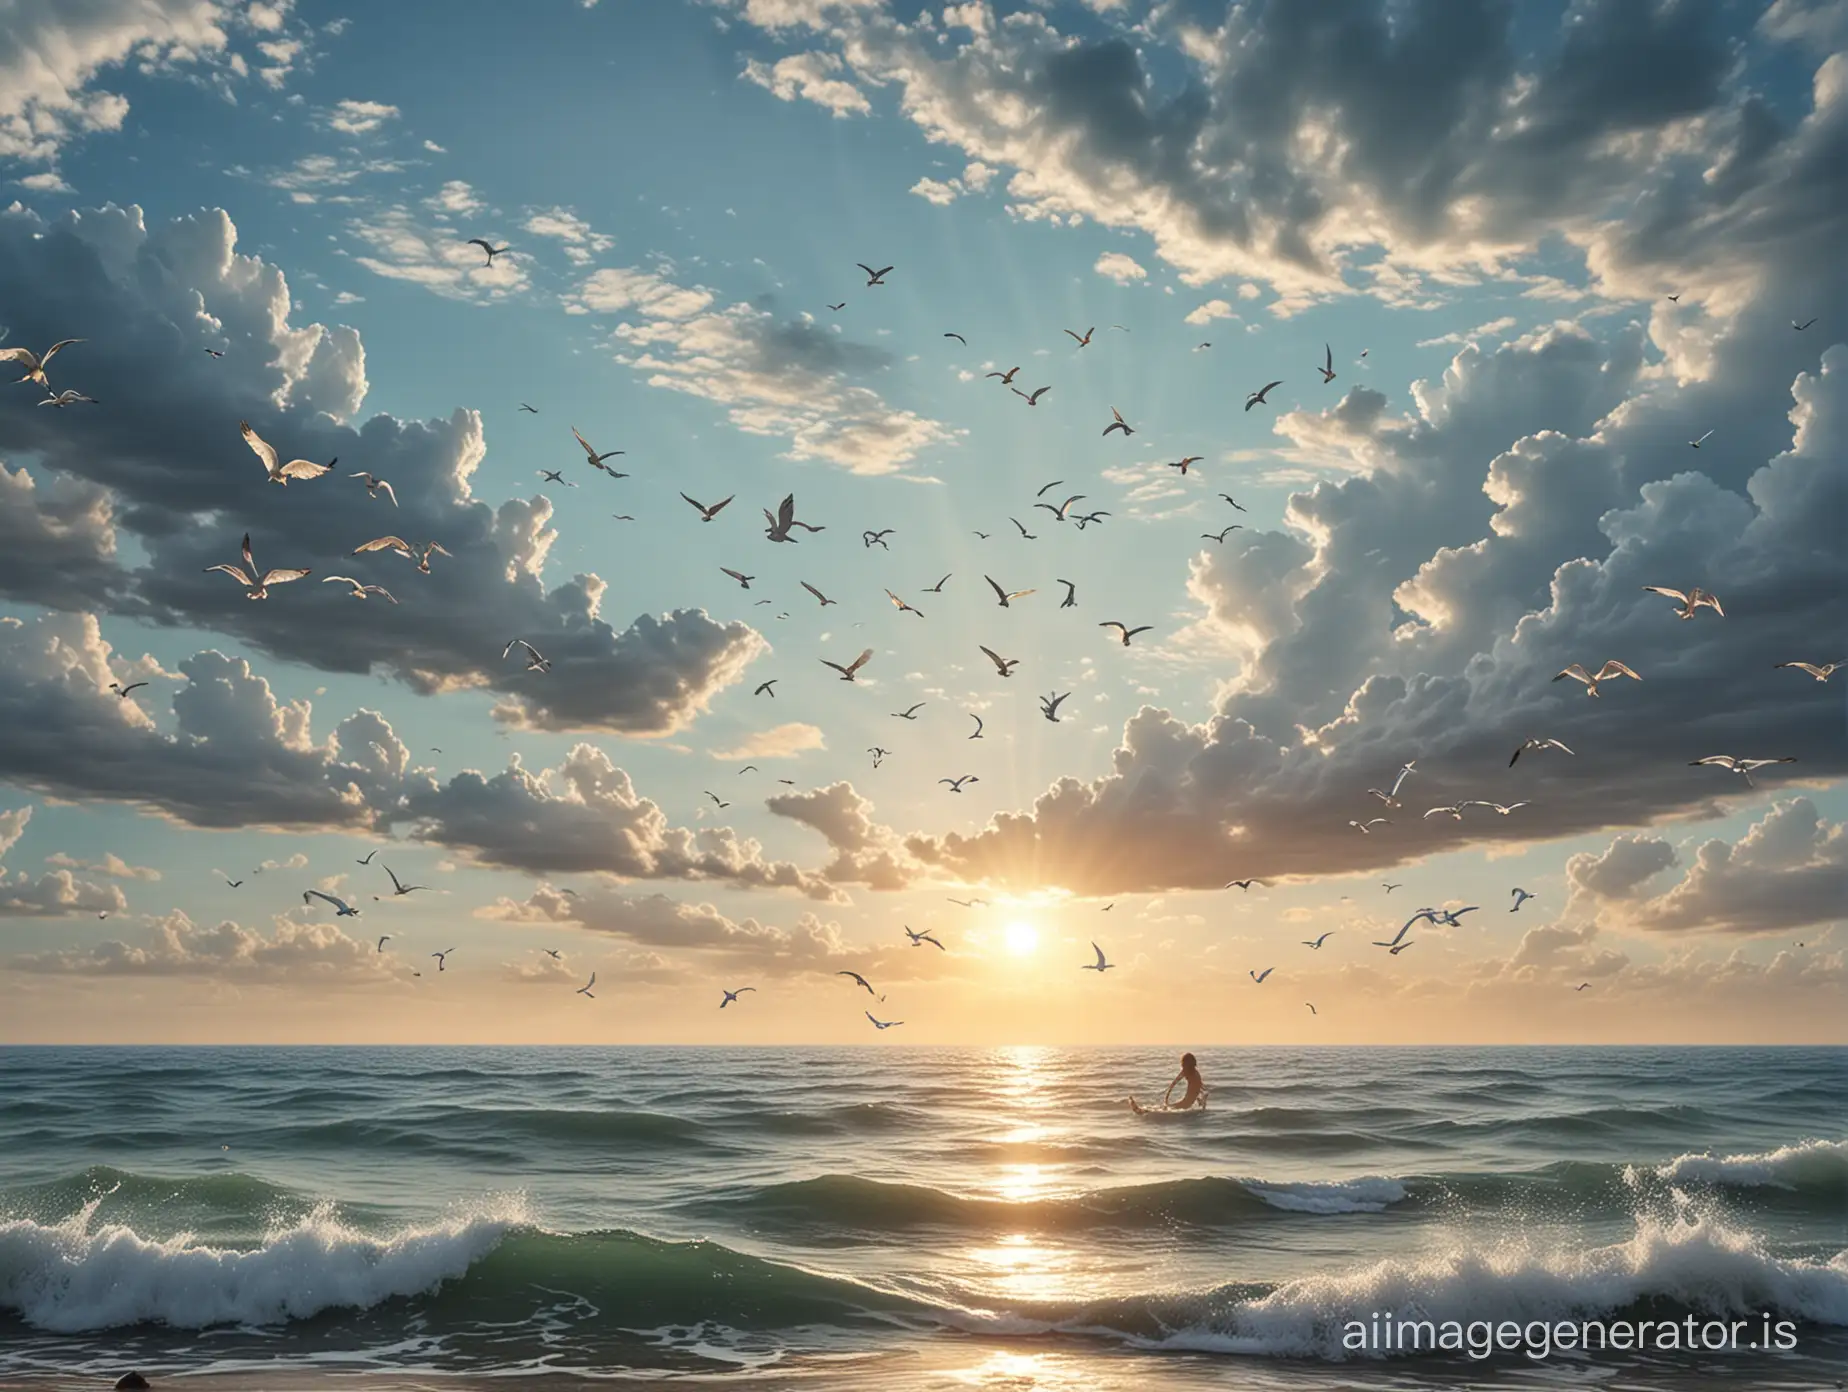 Naked-Mermaids-Soaring-Above-Summer-Seas-with-Seagulls